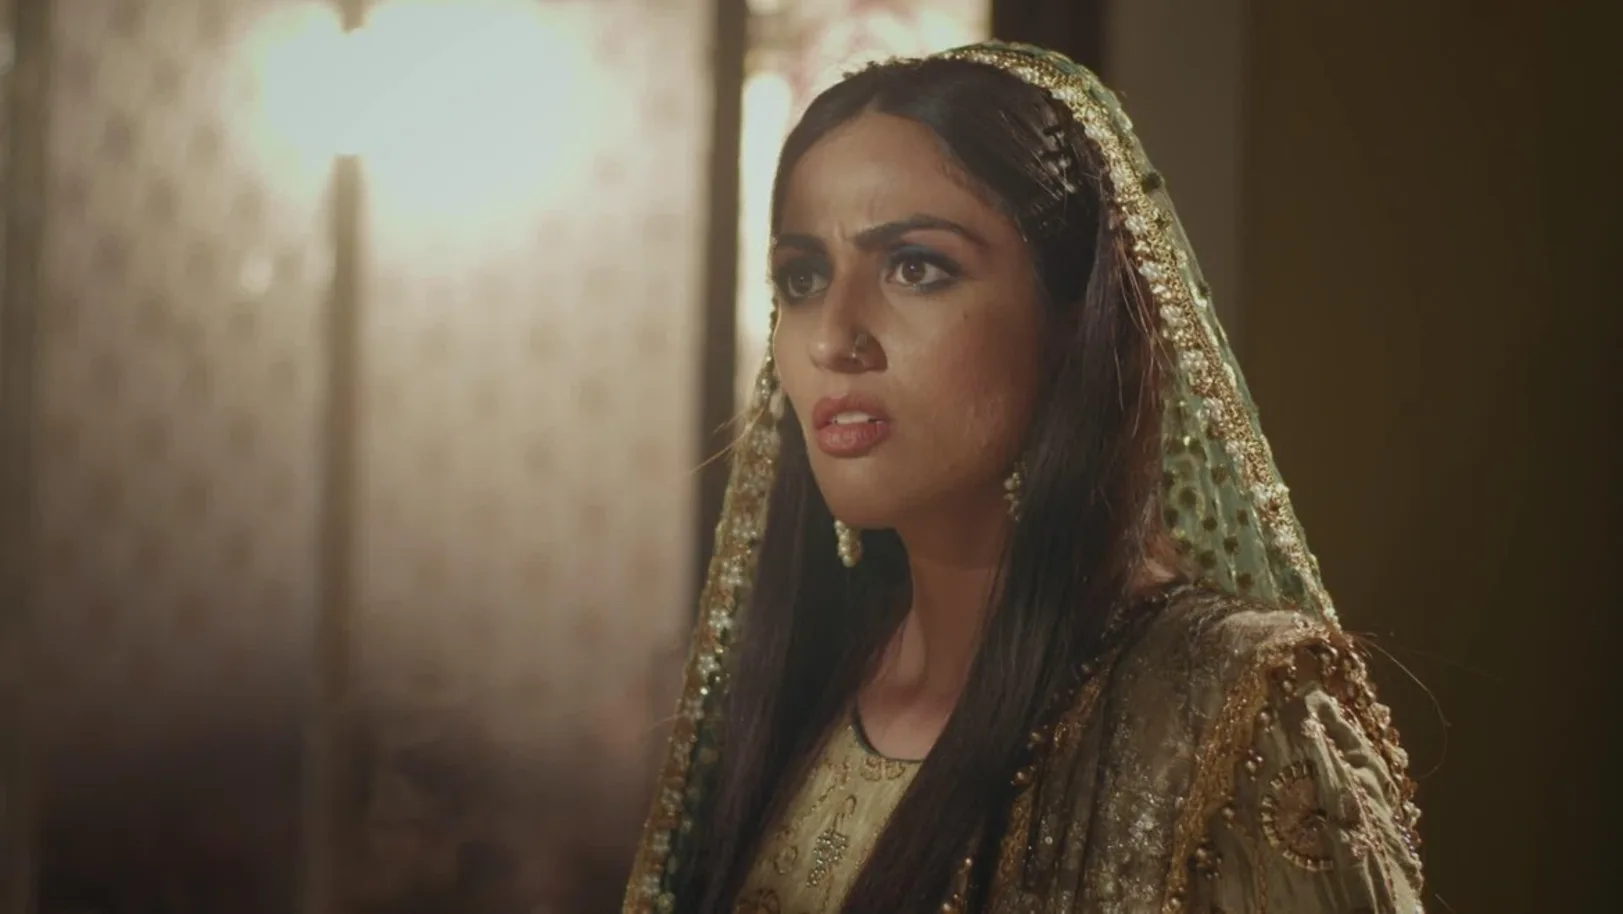 Kabir Decides Escorting Ayesha for Her Therapy - Ishq Subhan Allah Episode 305